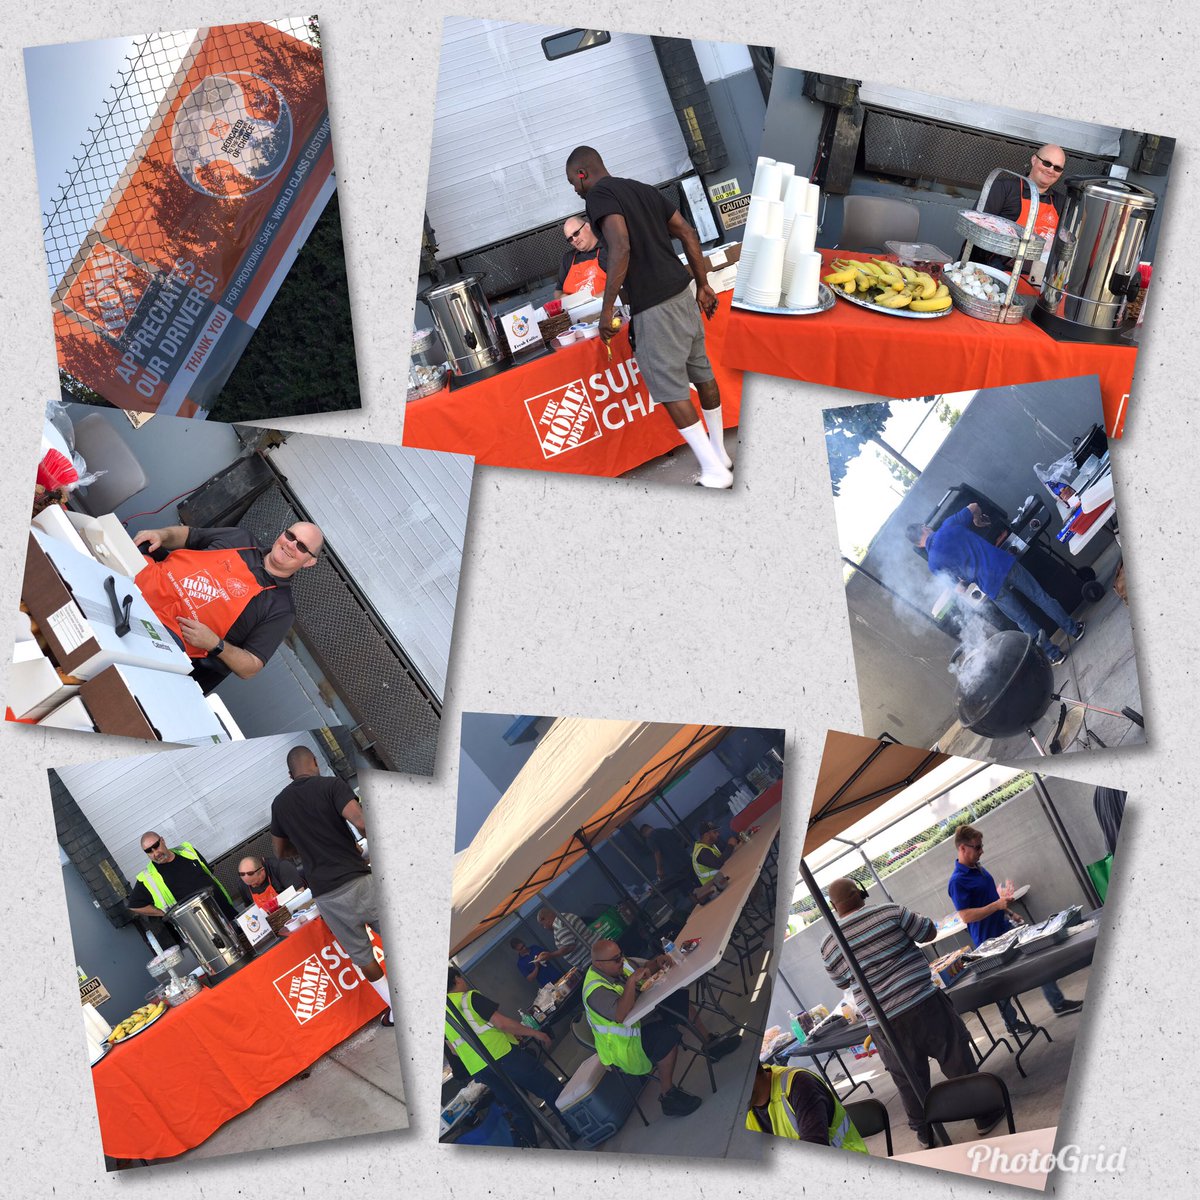 In honor of #DriverAppreciationWeek @JonathanW_HD out here passing out pastries, bagels, coffee, sodas and water AND some BBQ!! @JLee_5642 @5641J @ixo172 @RobertLA5641  @ErikThd @KWadeTracy5641 @john_abrantes @lennyatdepot #THDDriverAppreciation